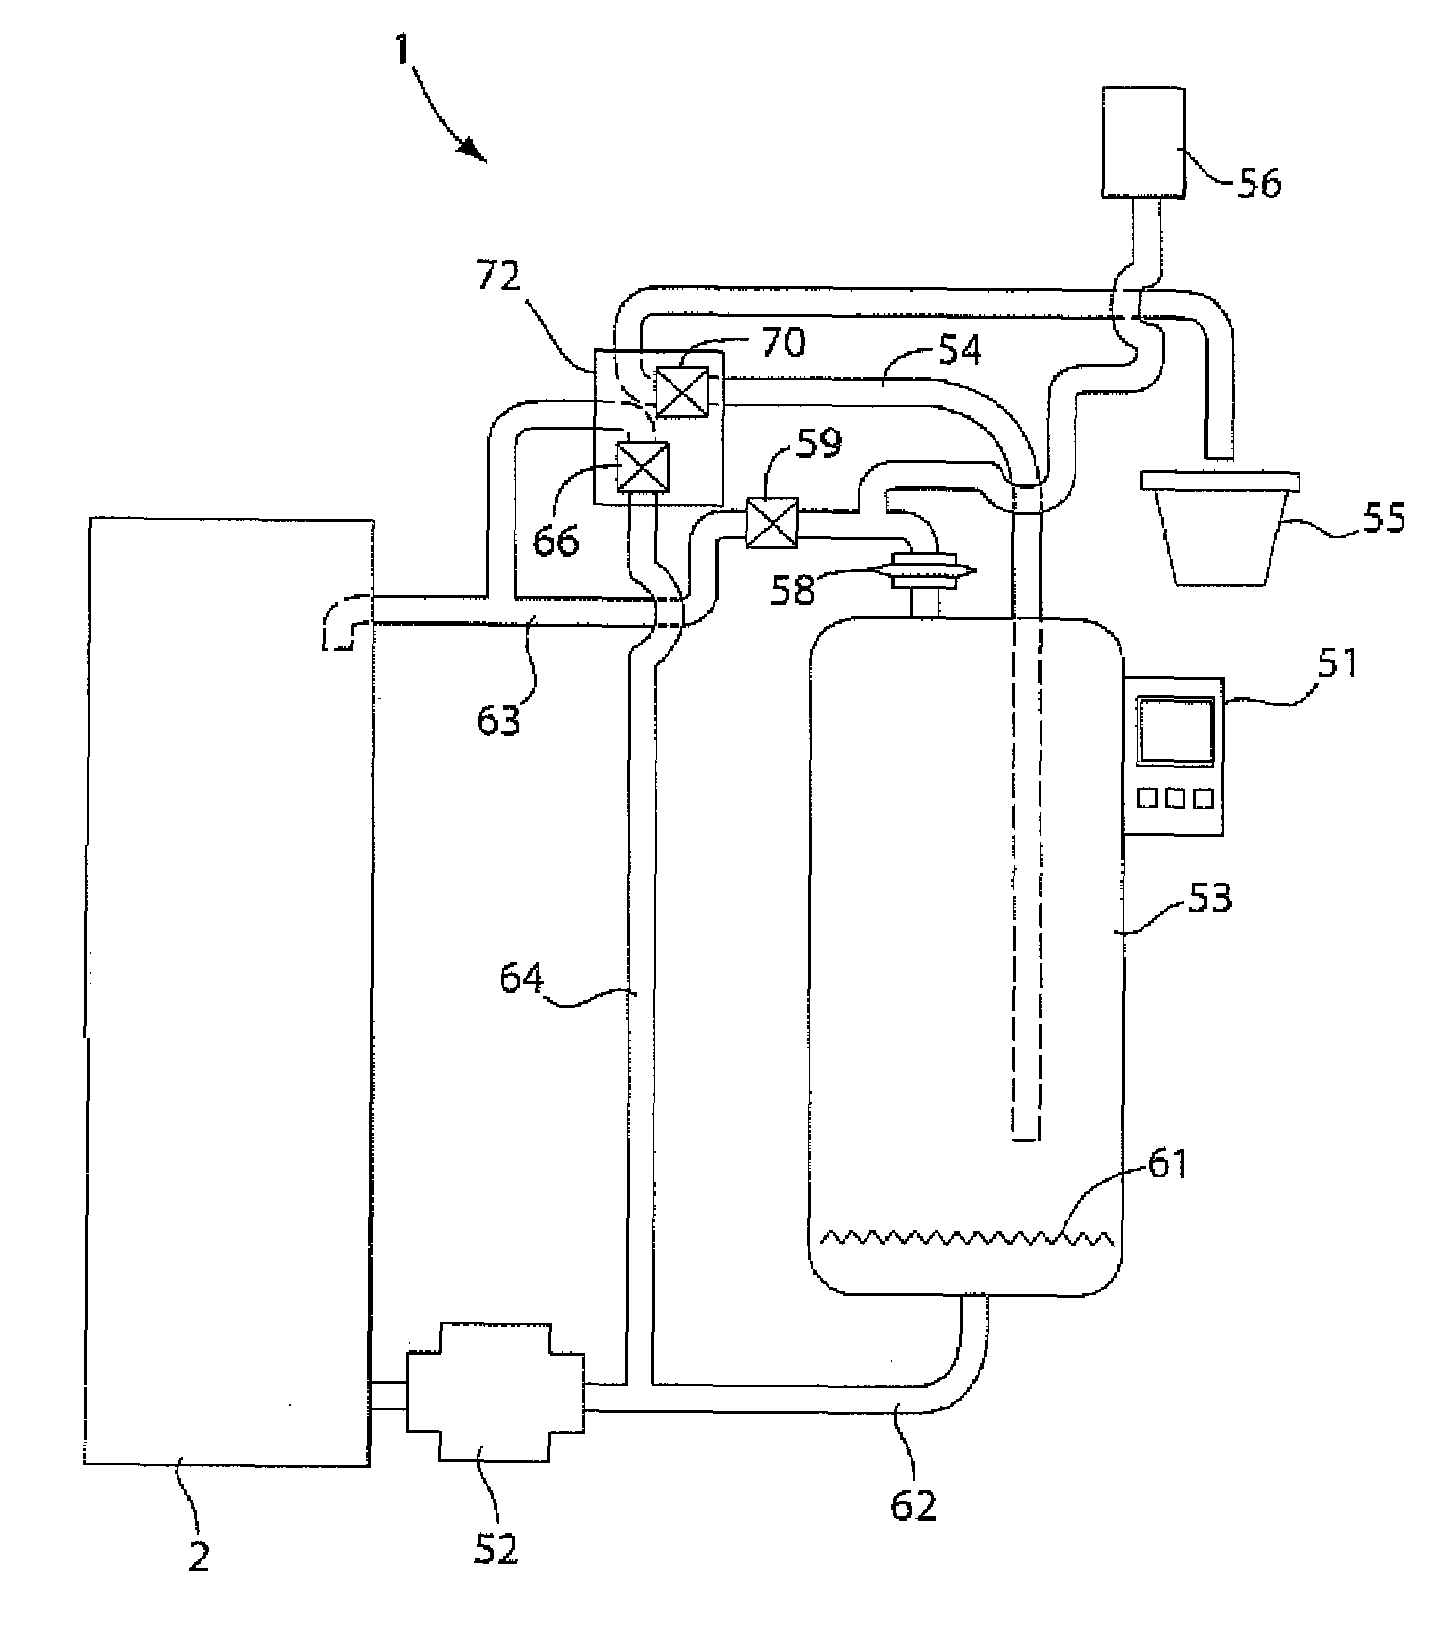 Drain for beverage forming machine